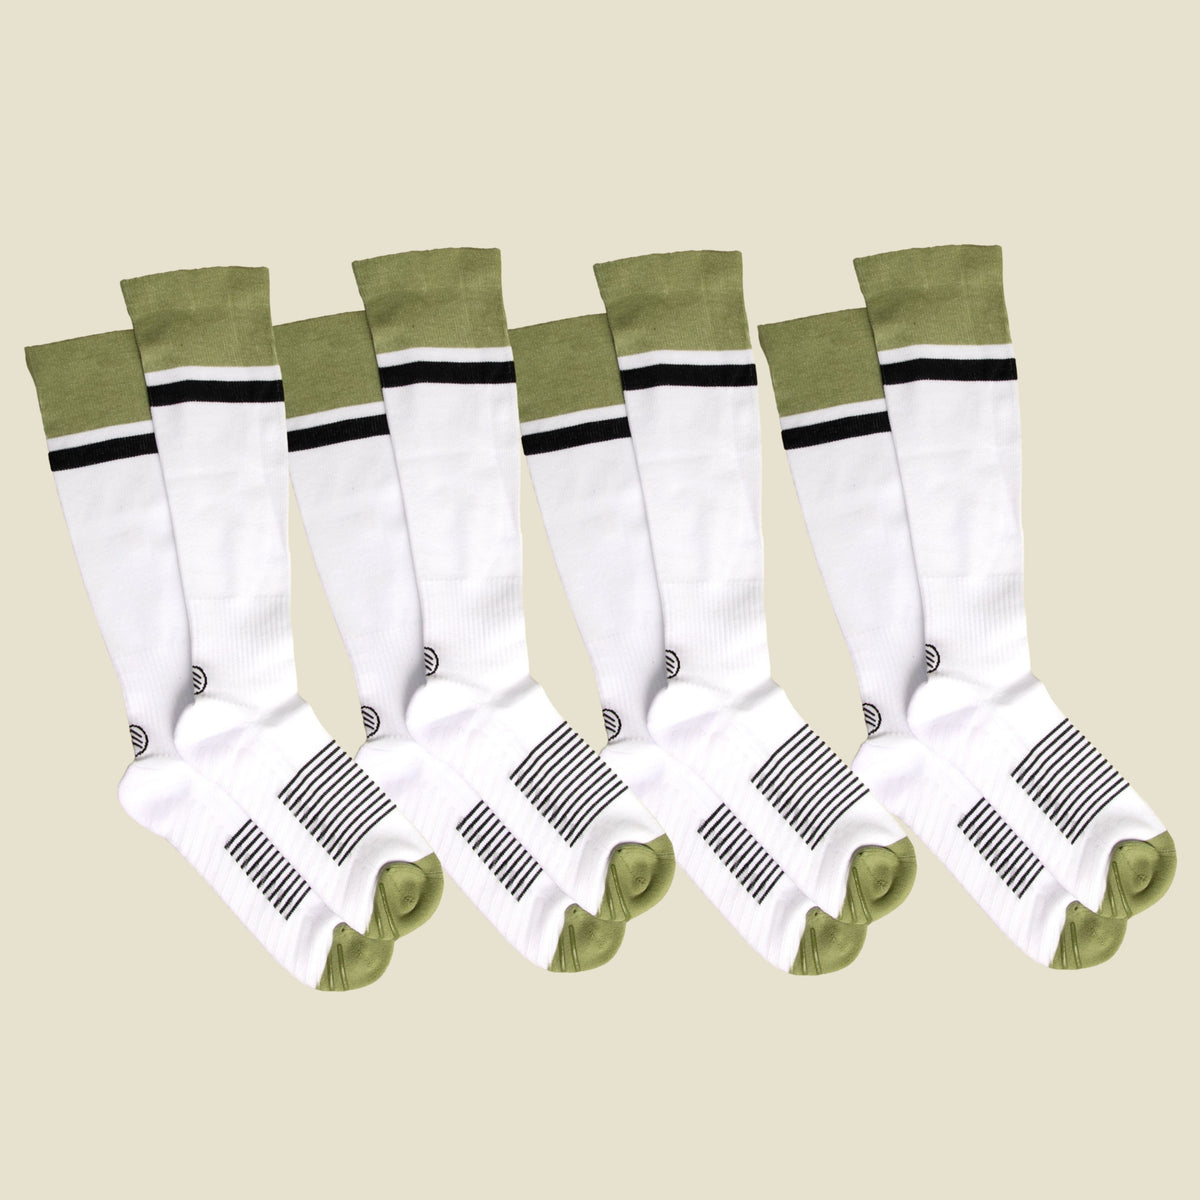 Men&#39;s White/Black/Green Compression Socks with Grips - 4 Pairs - Gripjoy Socks